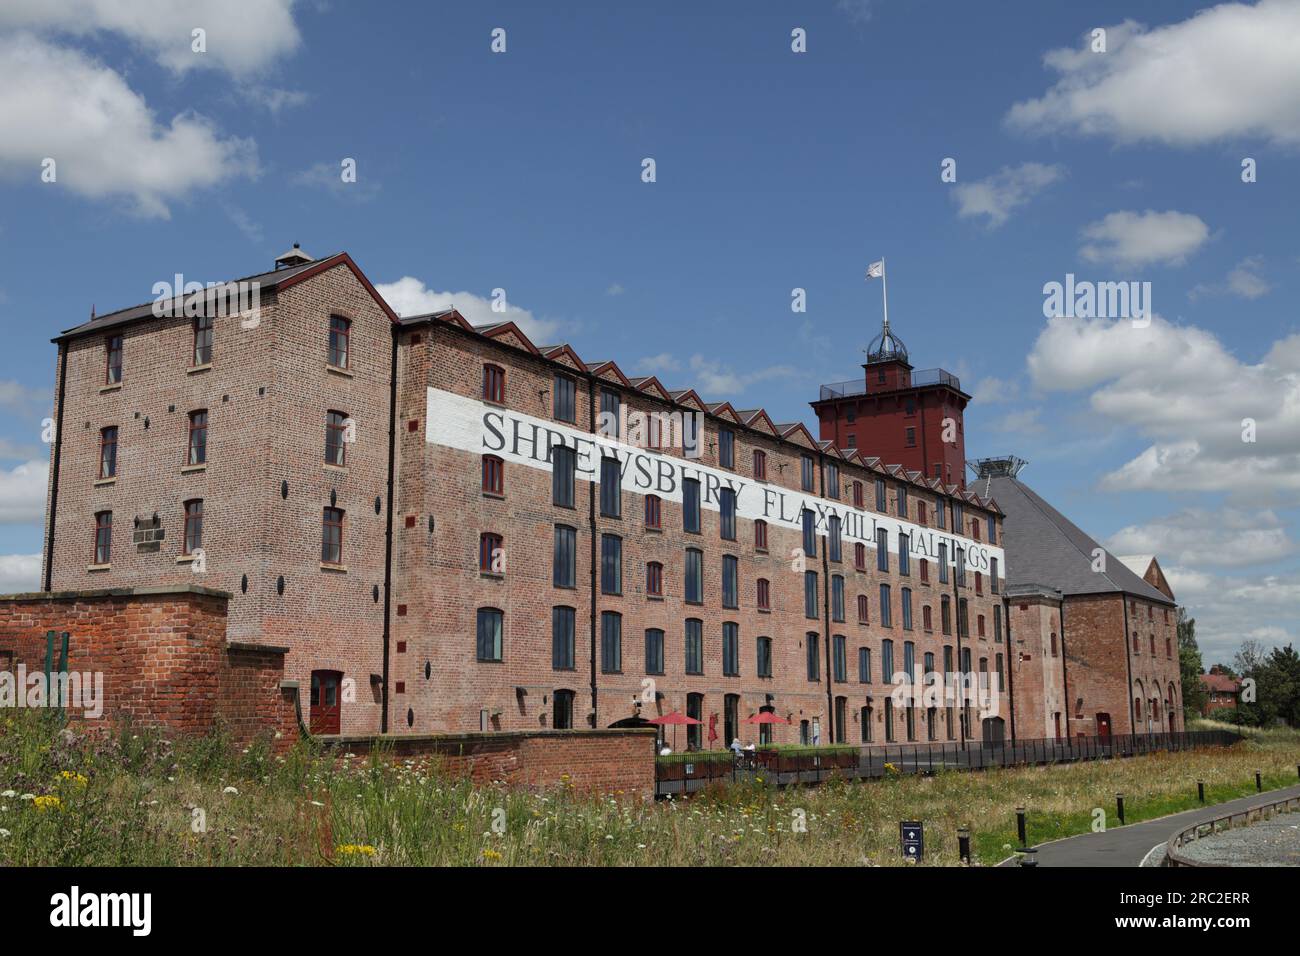 External elevation of the recent restoration of Shrewsbury Flaxmill Maltings. The building was the world's first iron-framed building. Stock Photo